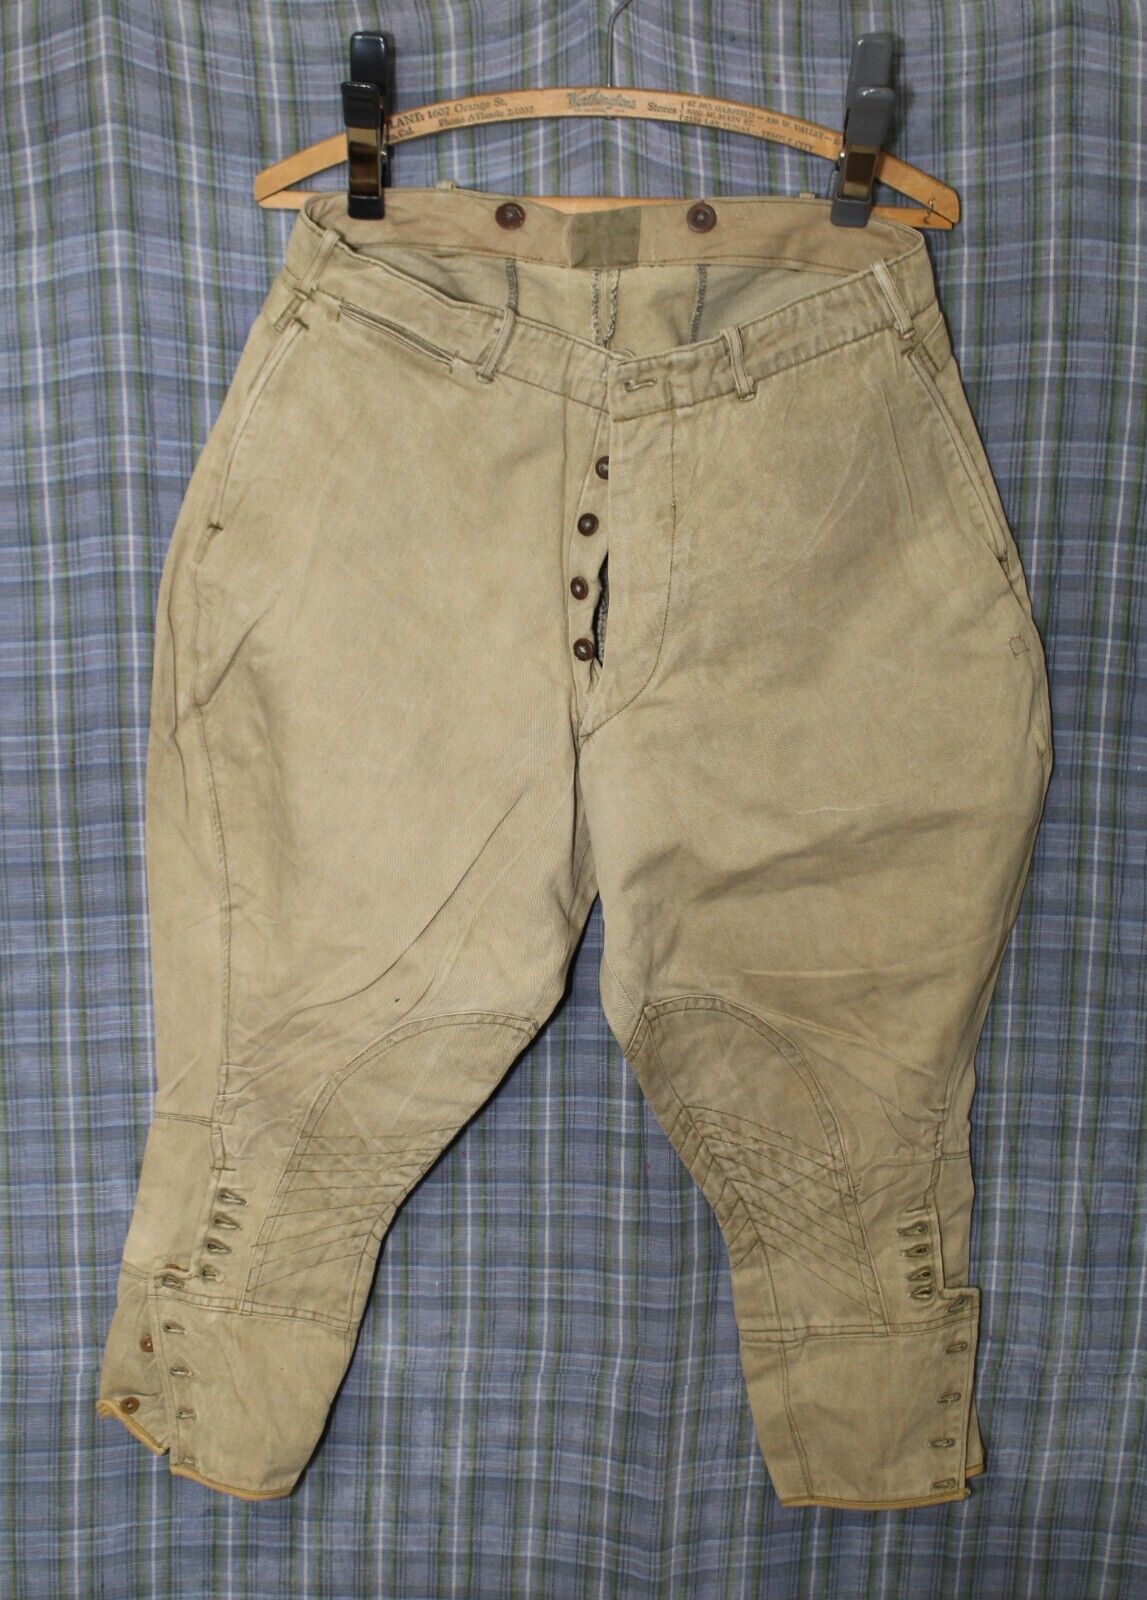 WWII Pre WWII 1930s 1940s US Army Cavalry Riding Pants Trousers Size 30 W x 21 L